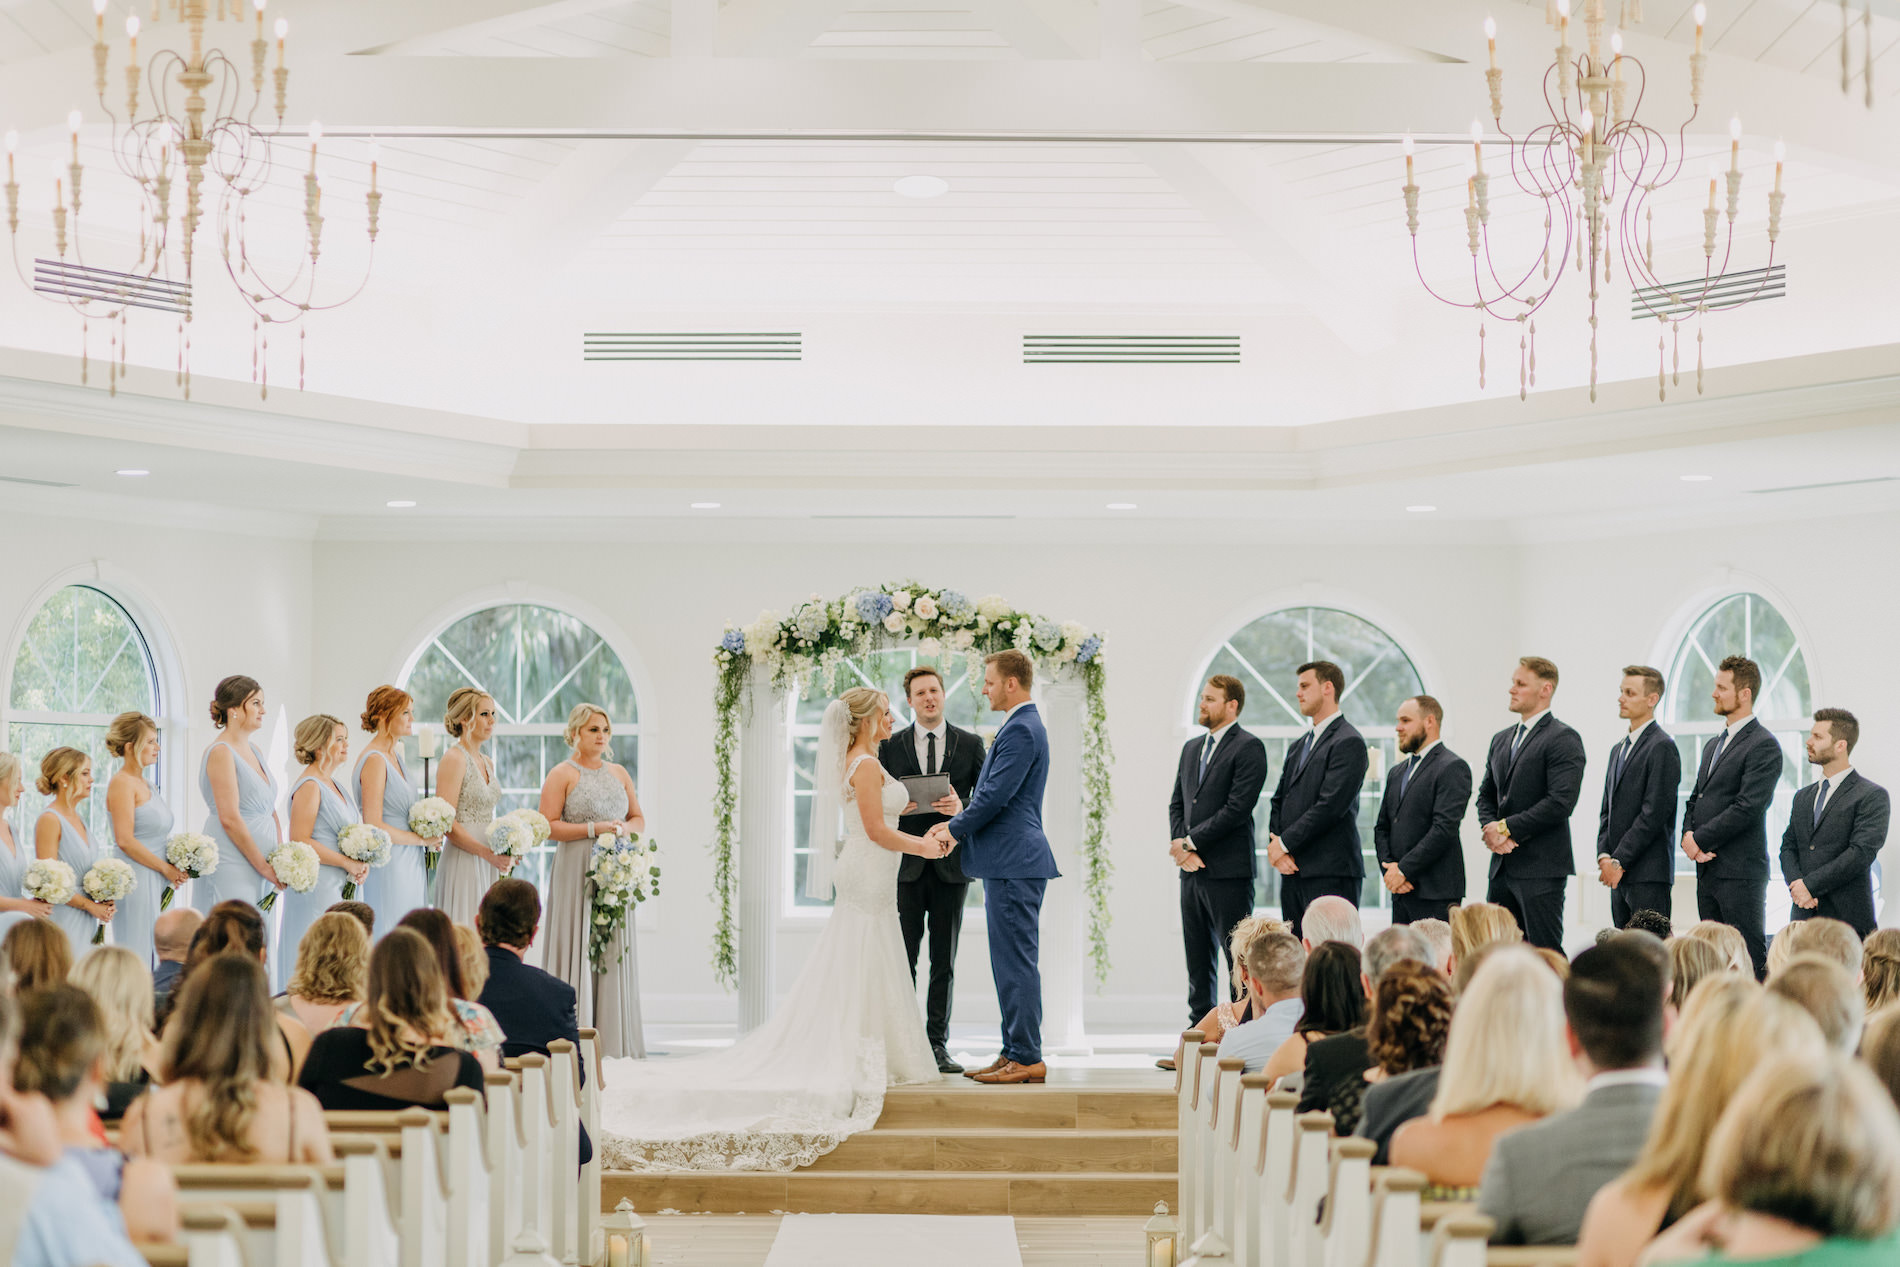 Florida Bride and Groom Exchanging Vows During Traditional Church Wedding Ceremony Portrait Under Greenery and White and Powder Blue Floral Arch | Tampa Wedding Venue Harborside Chapel